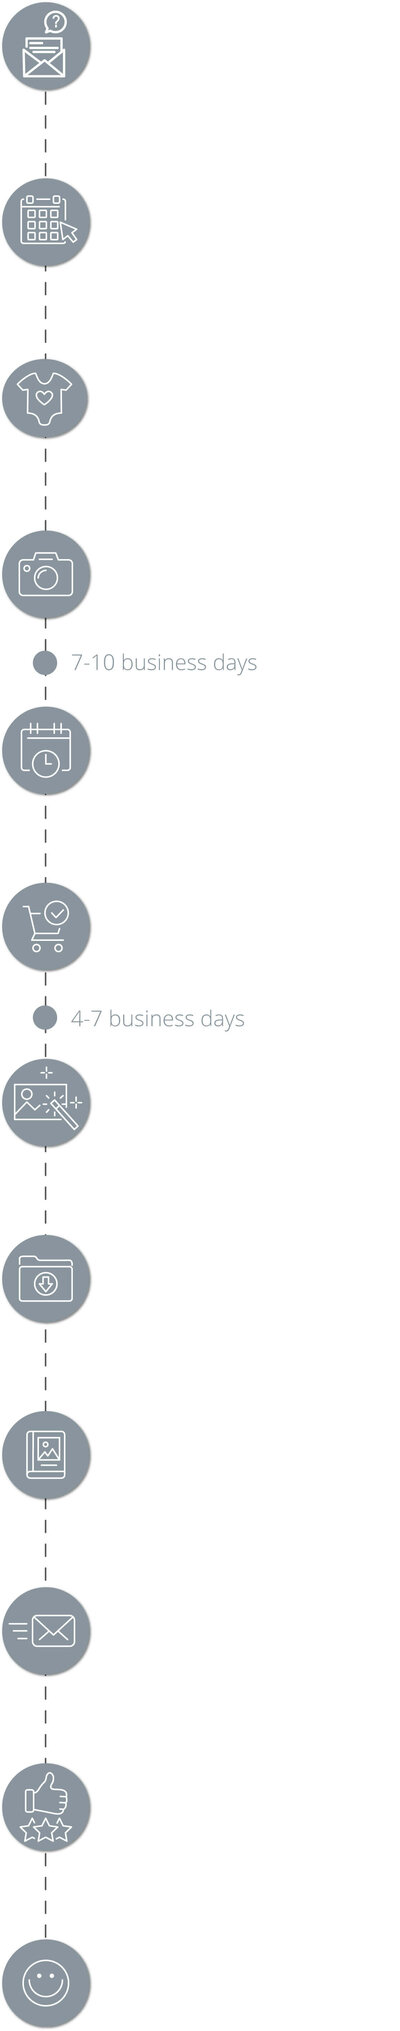 Session-Roadmap_Icons-Website-Mobile